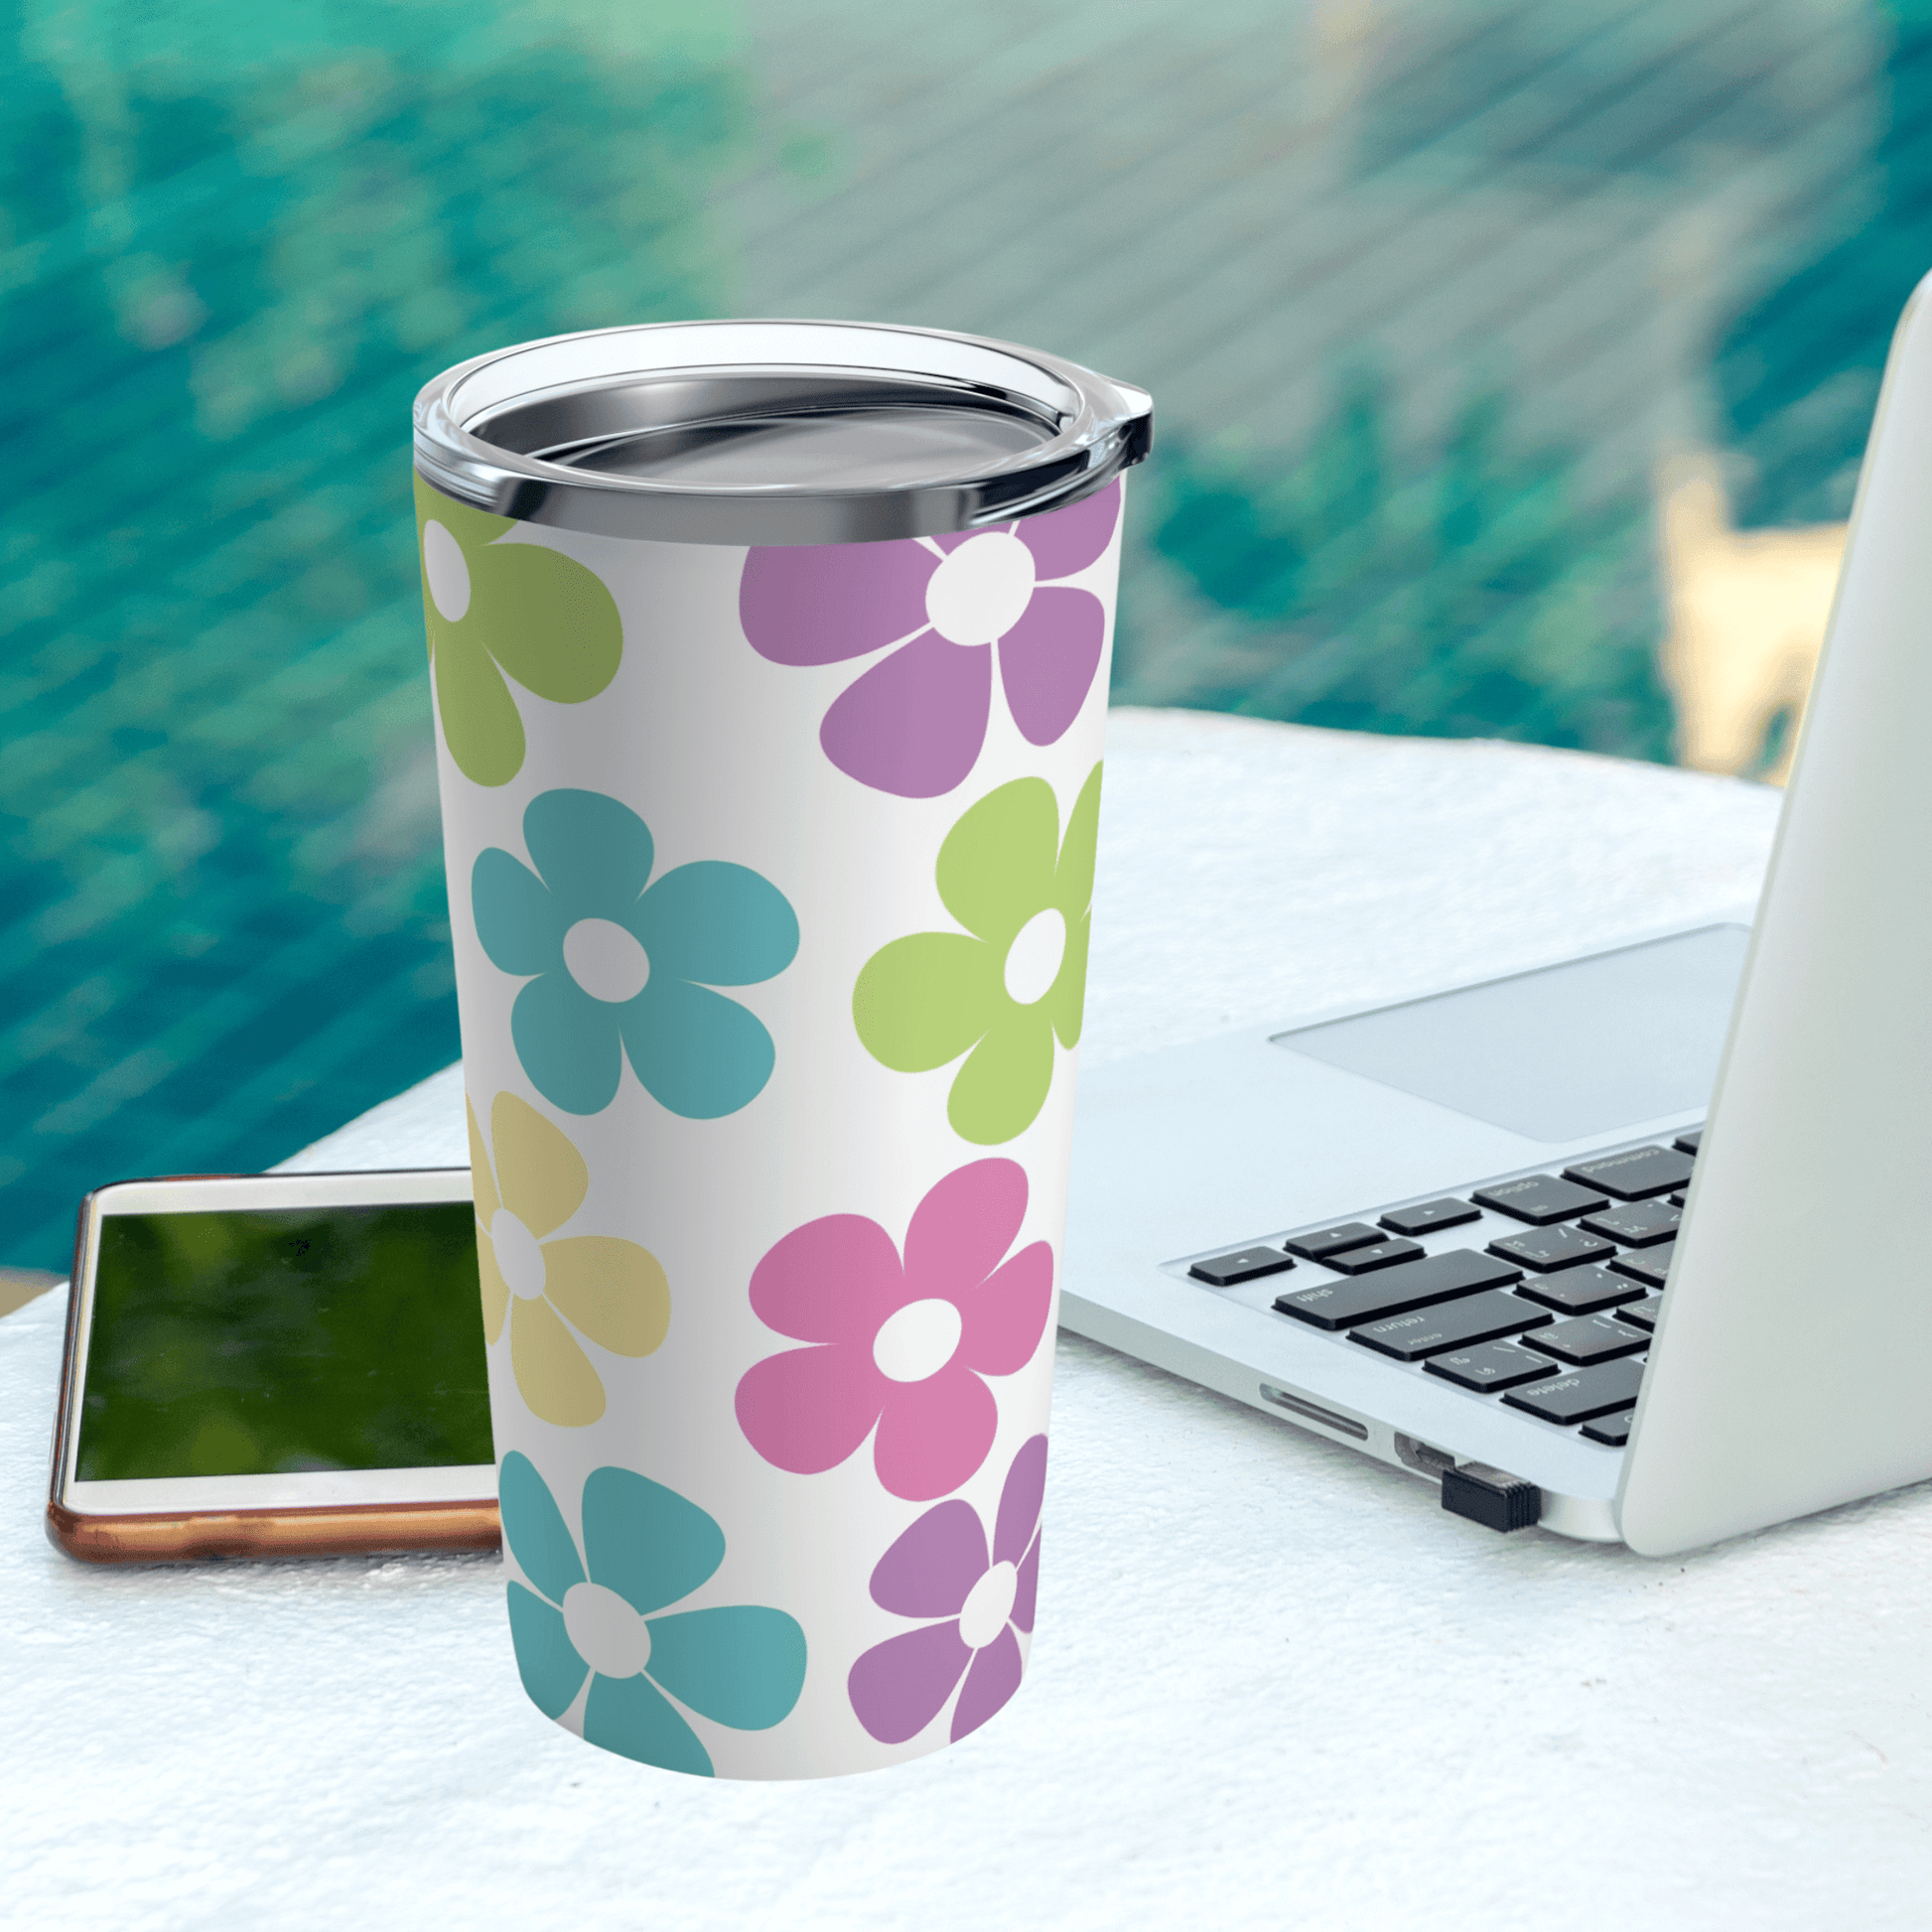 Our cute summer tumbler looks great for a summer cup next to the pool.